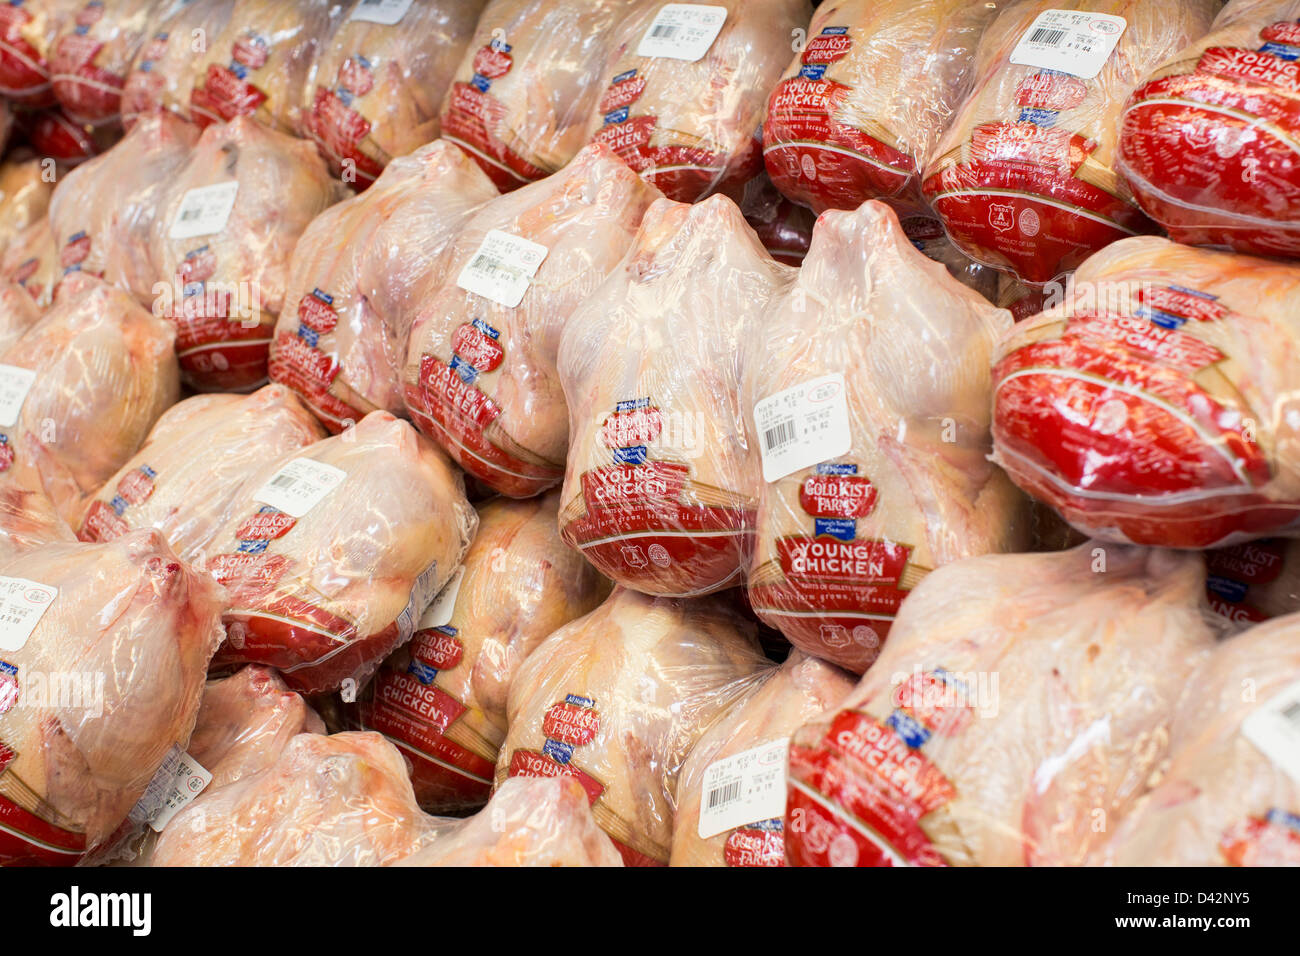 Whole chickens on display at a Costco Wholesale Warehouse Club. Stock Photo